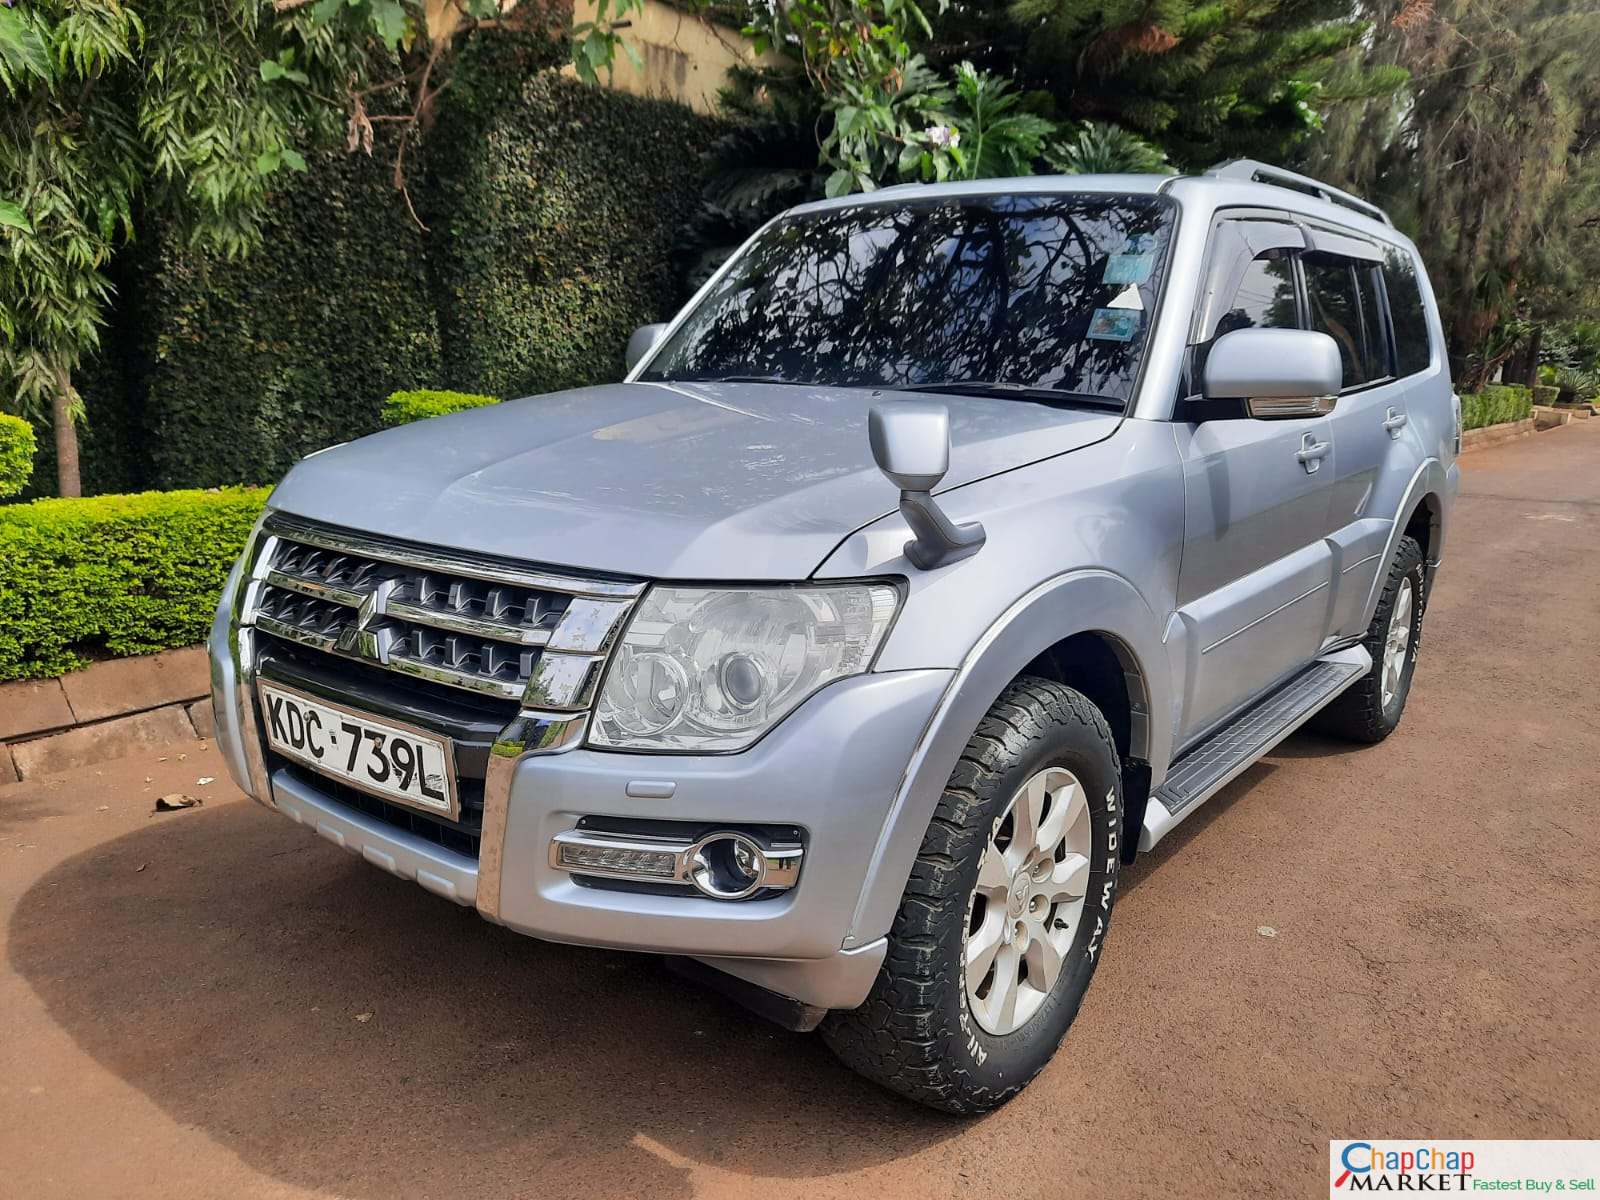 Mitsubishi Pajero For sale in Kenya fully loaded You Pay 30% Deposit Trade in Ok EXCLUSIVE